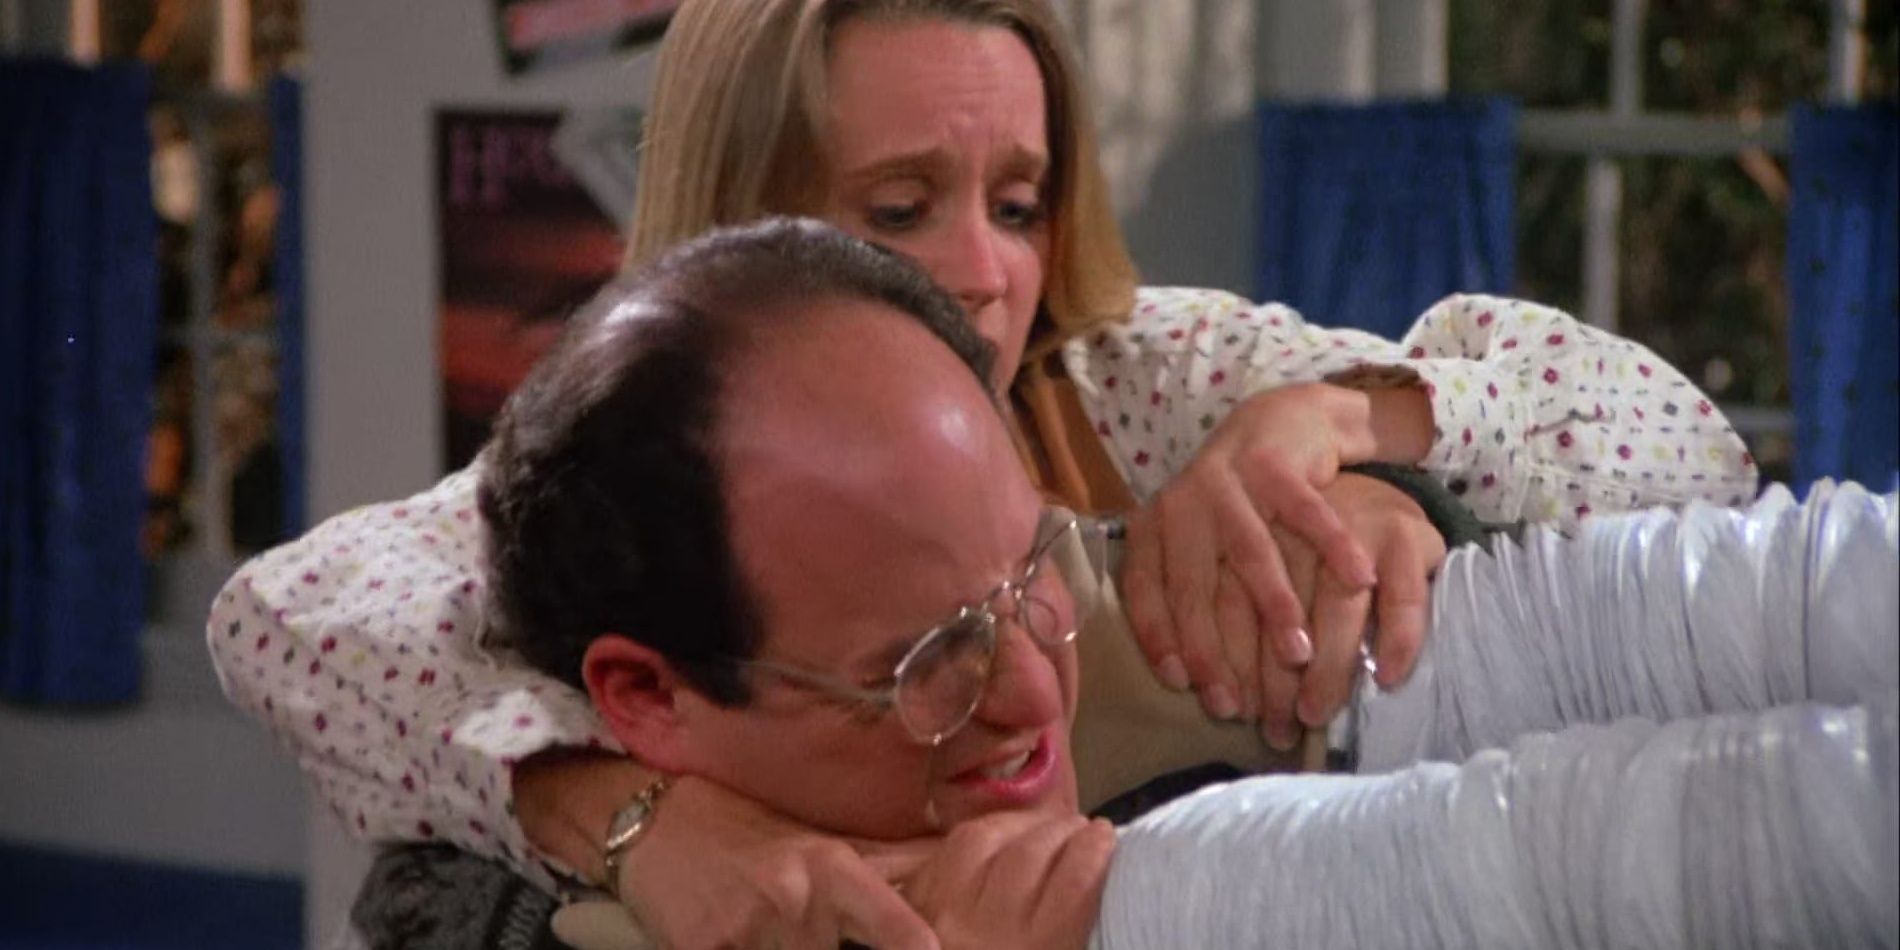 George being strangled by the Bubble Boy in the Bubble Boy episode of Seinfeld.